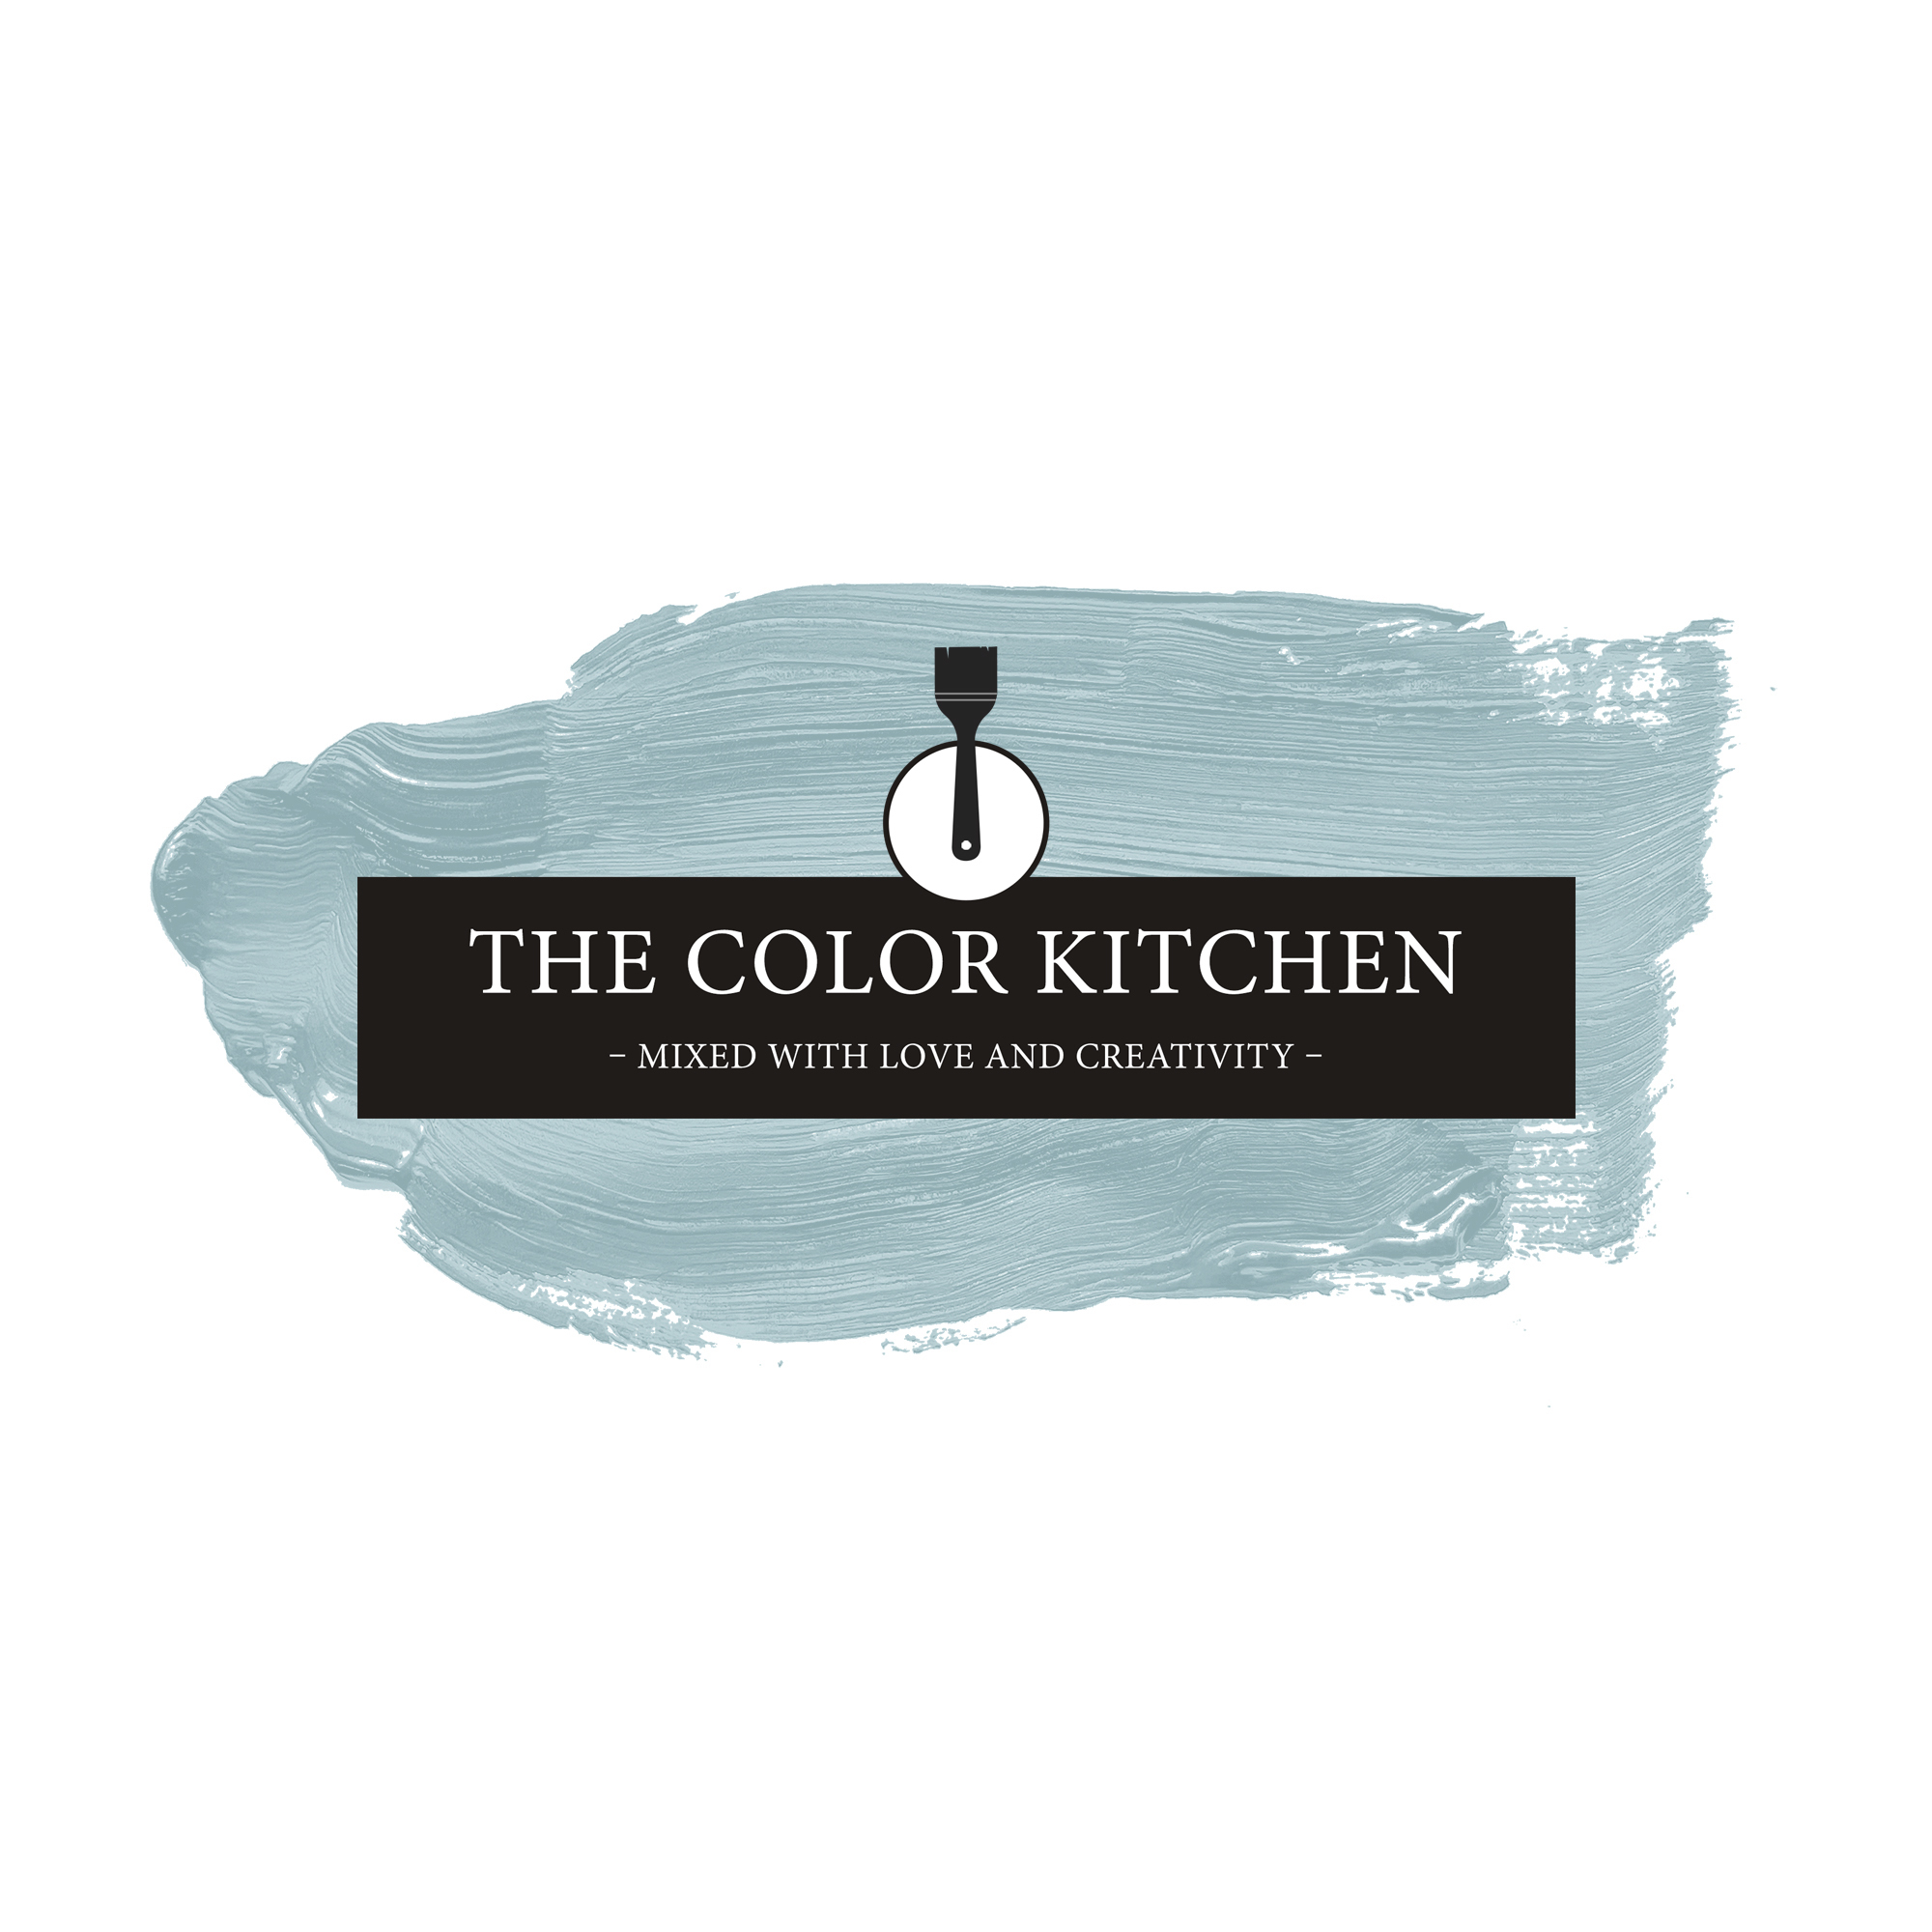 The Color Kitchen Detailed Duckegg 5 l